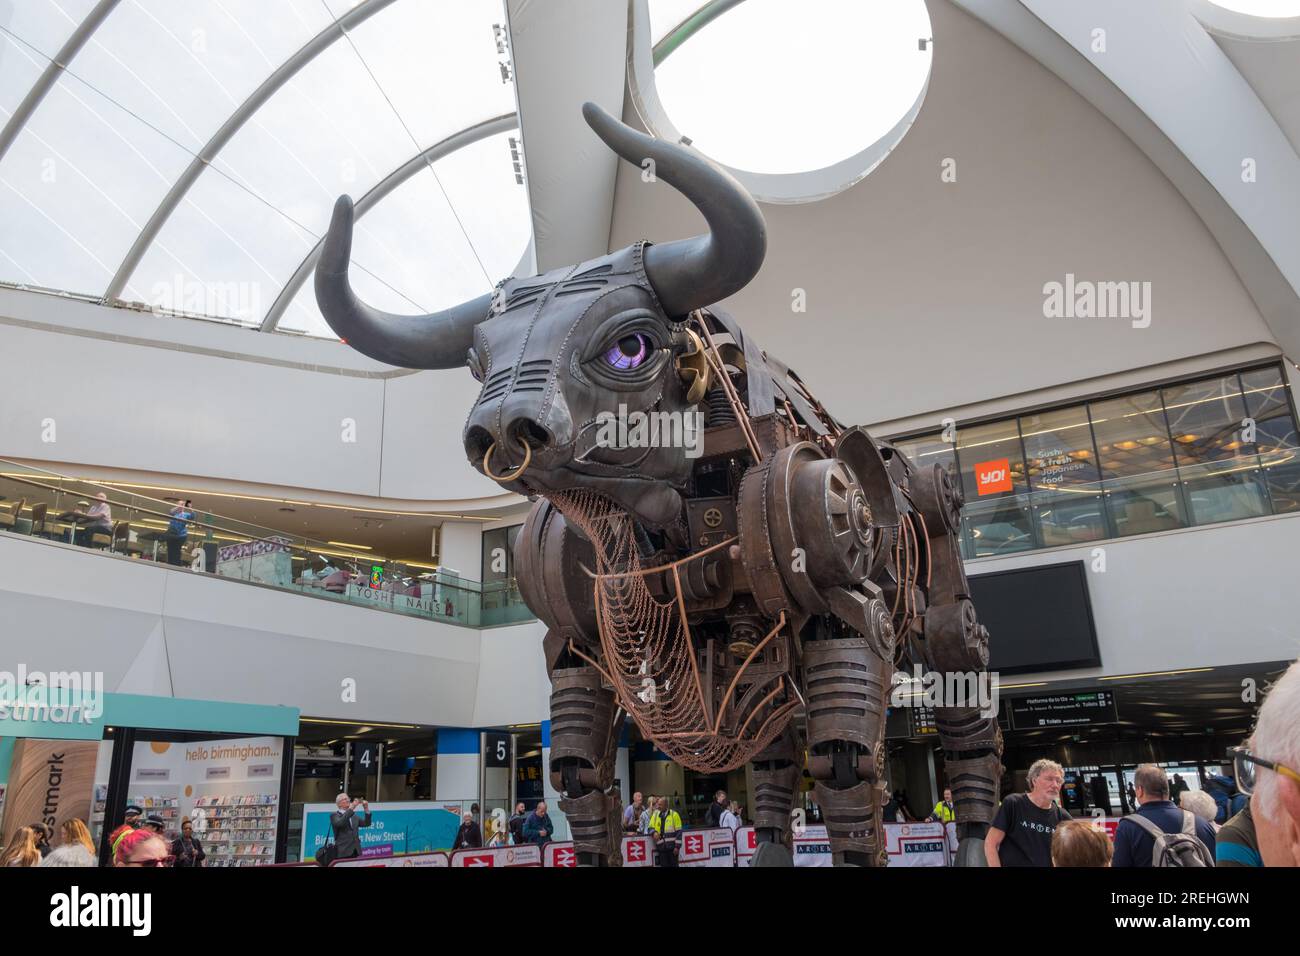 Ozzy the bull which was a feature of the Birmingham Commonwealth Games opening ceremony is now in the concourse at Birmingham New Street Station Stock Photo